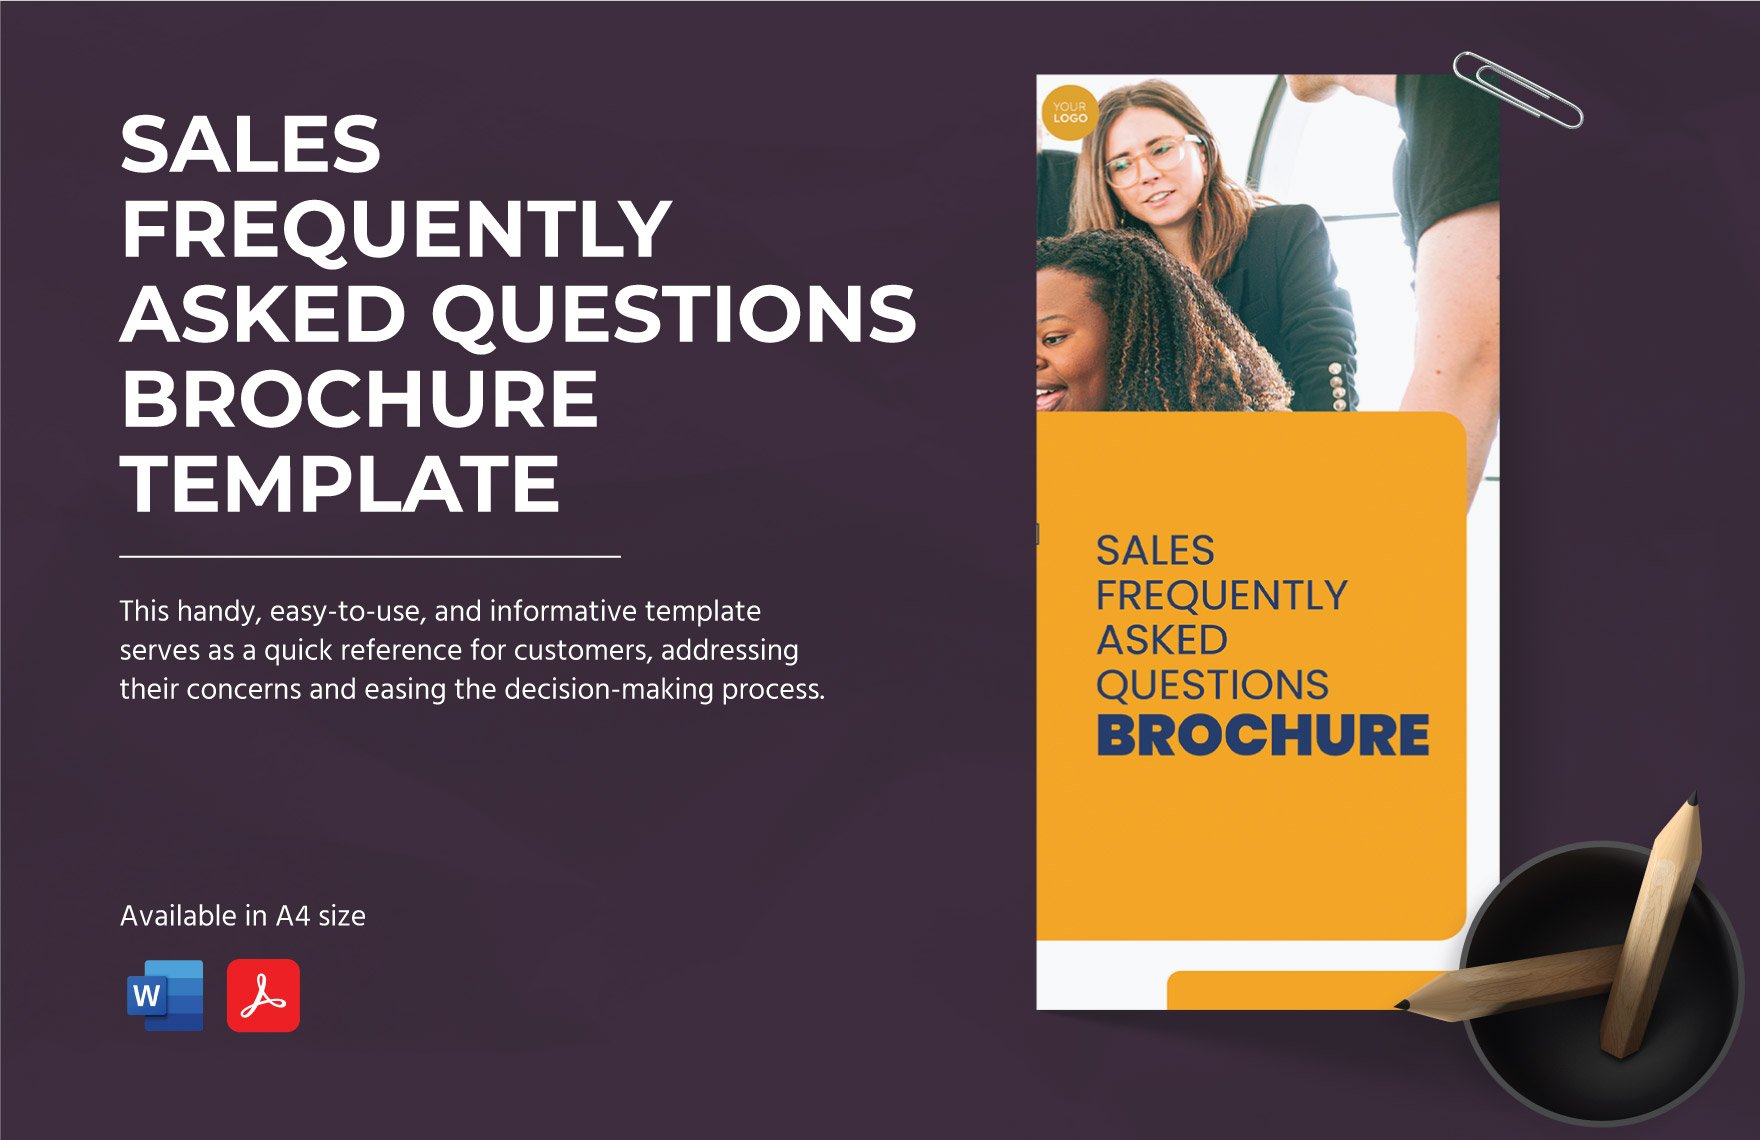 Sales Frequently Asked Questions Brochure Template